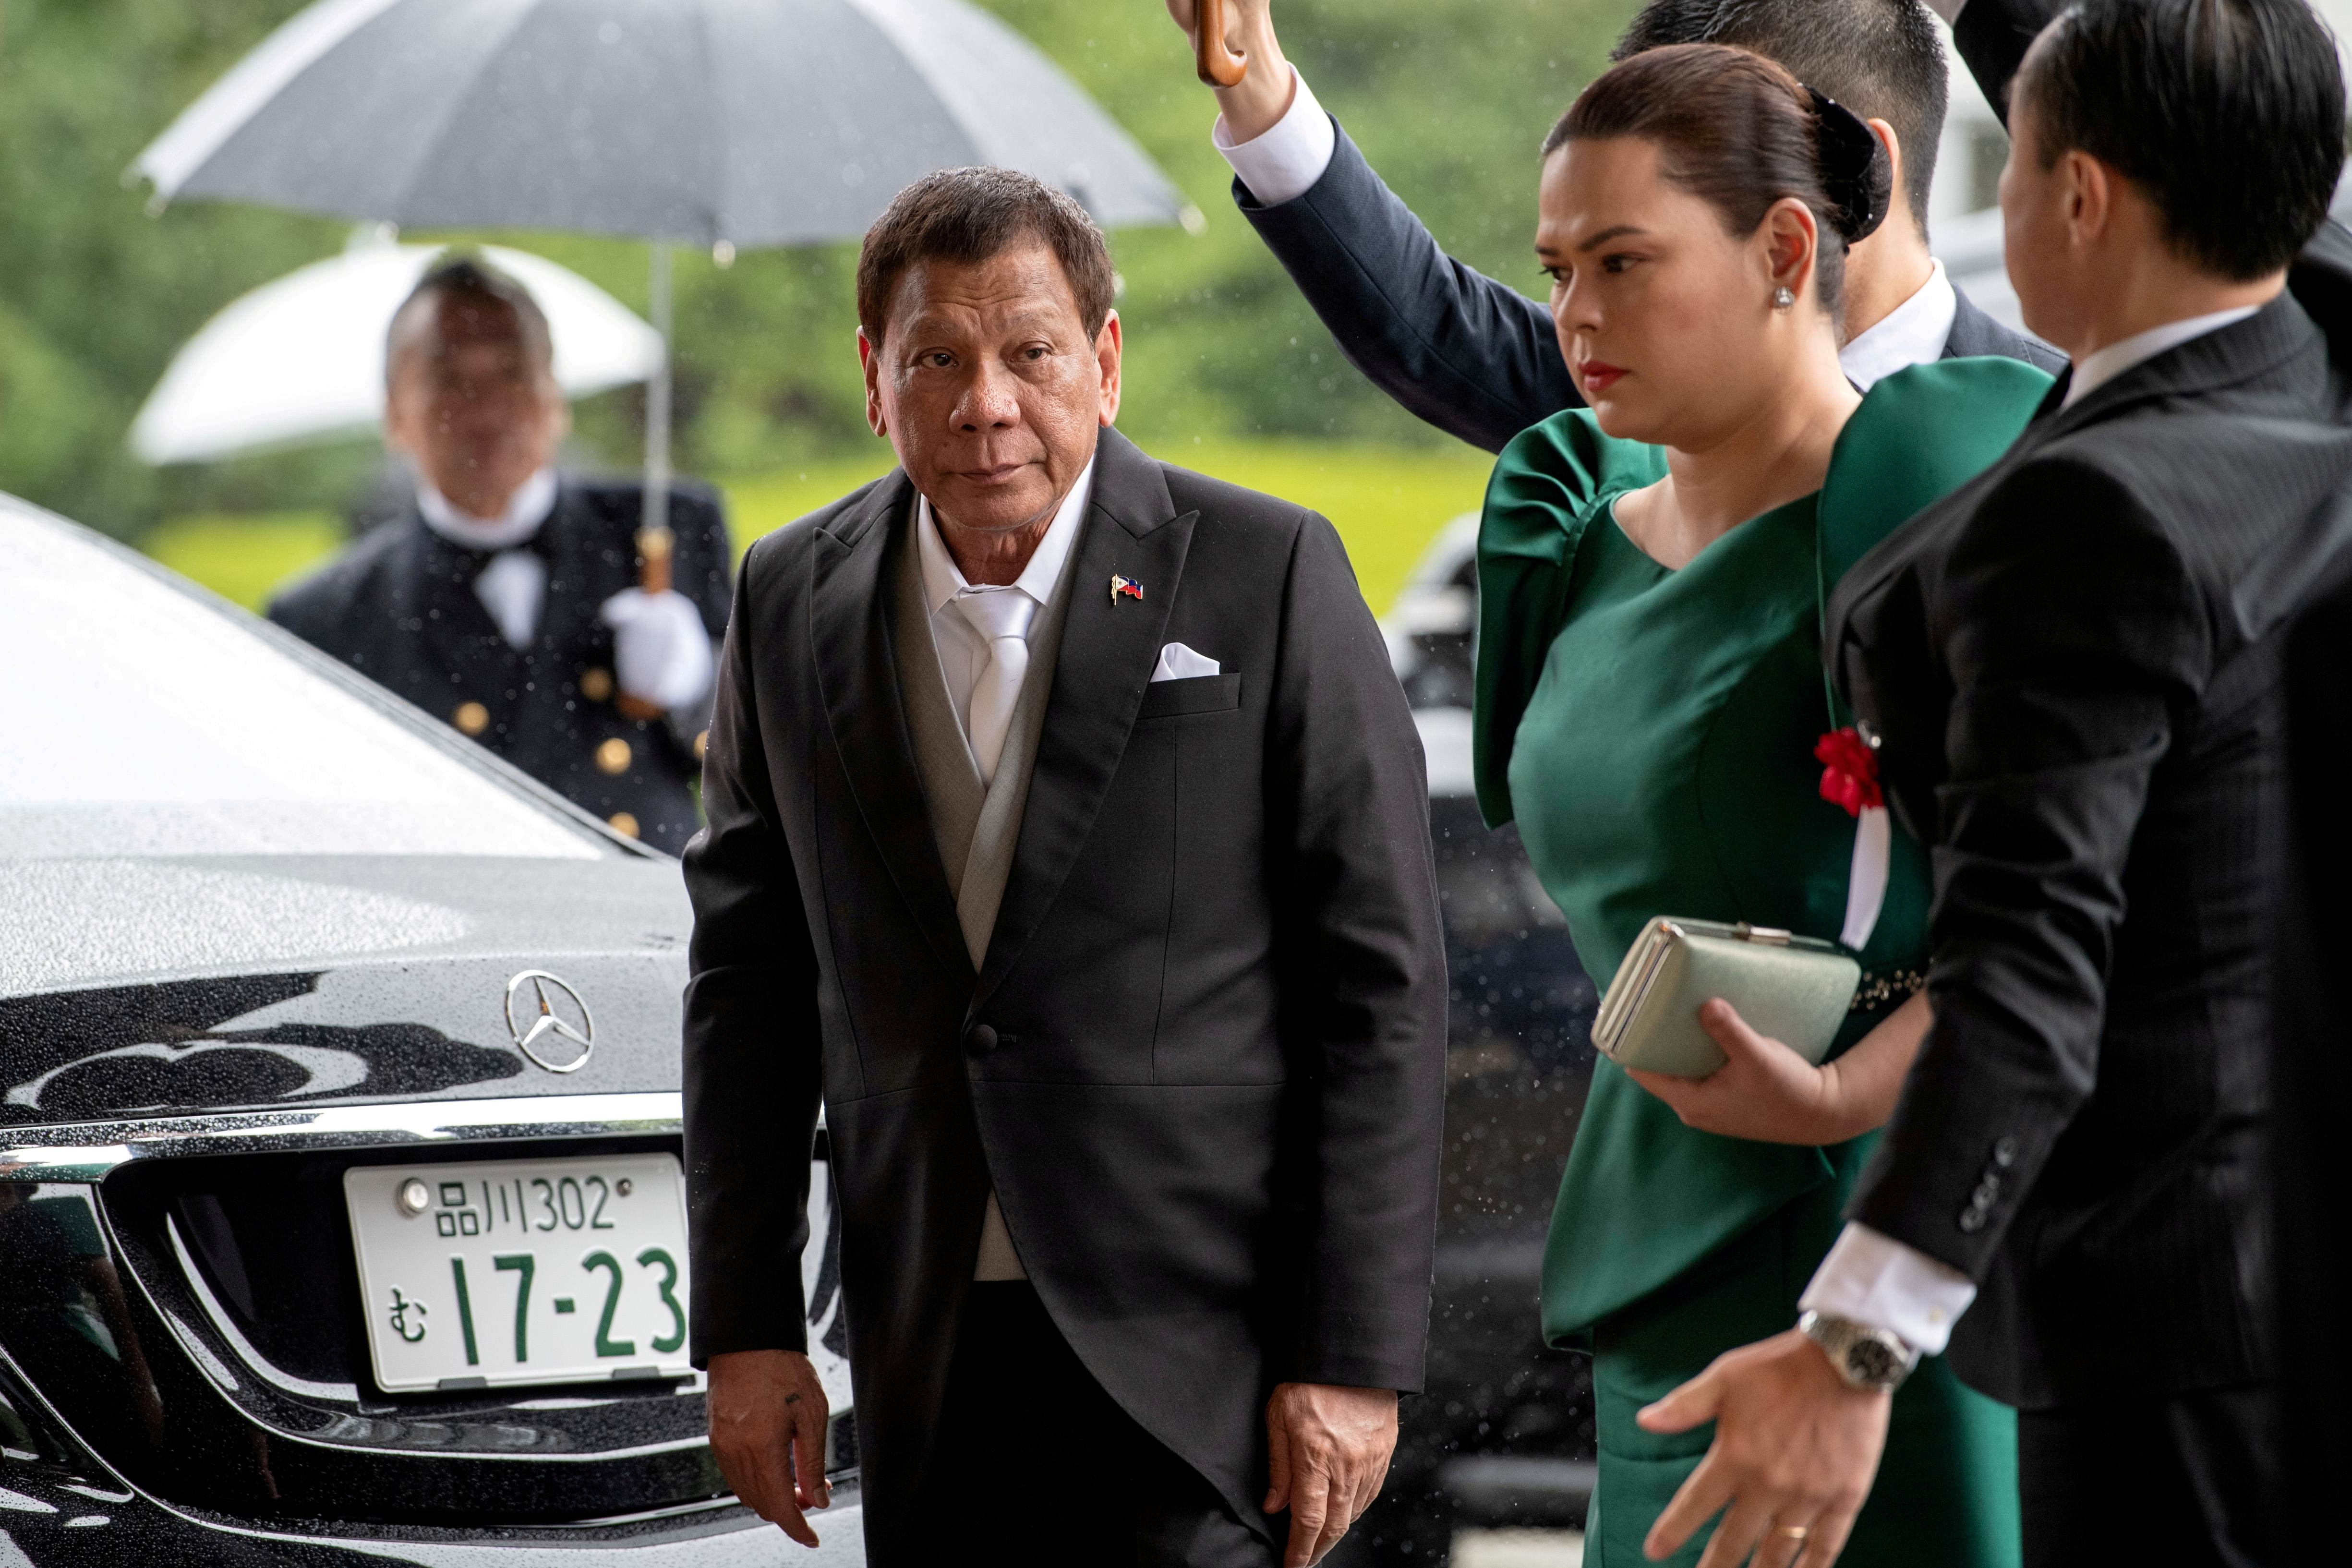 Philippines President Rodrigo Duterte arrives to attend the enthronement ceremony of Japan's Emperor Naruhito in Tokyo